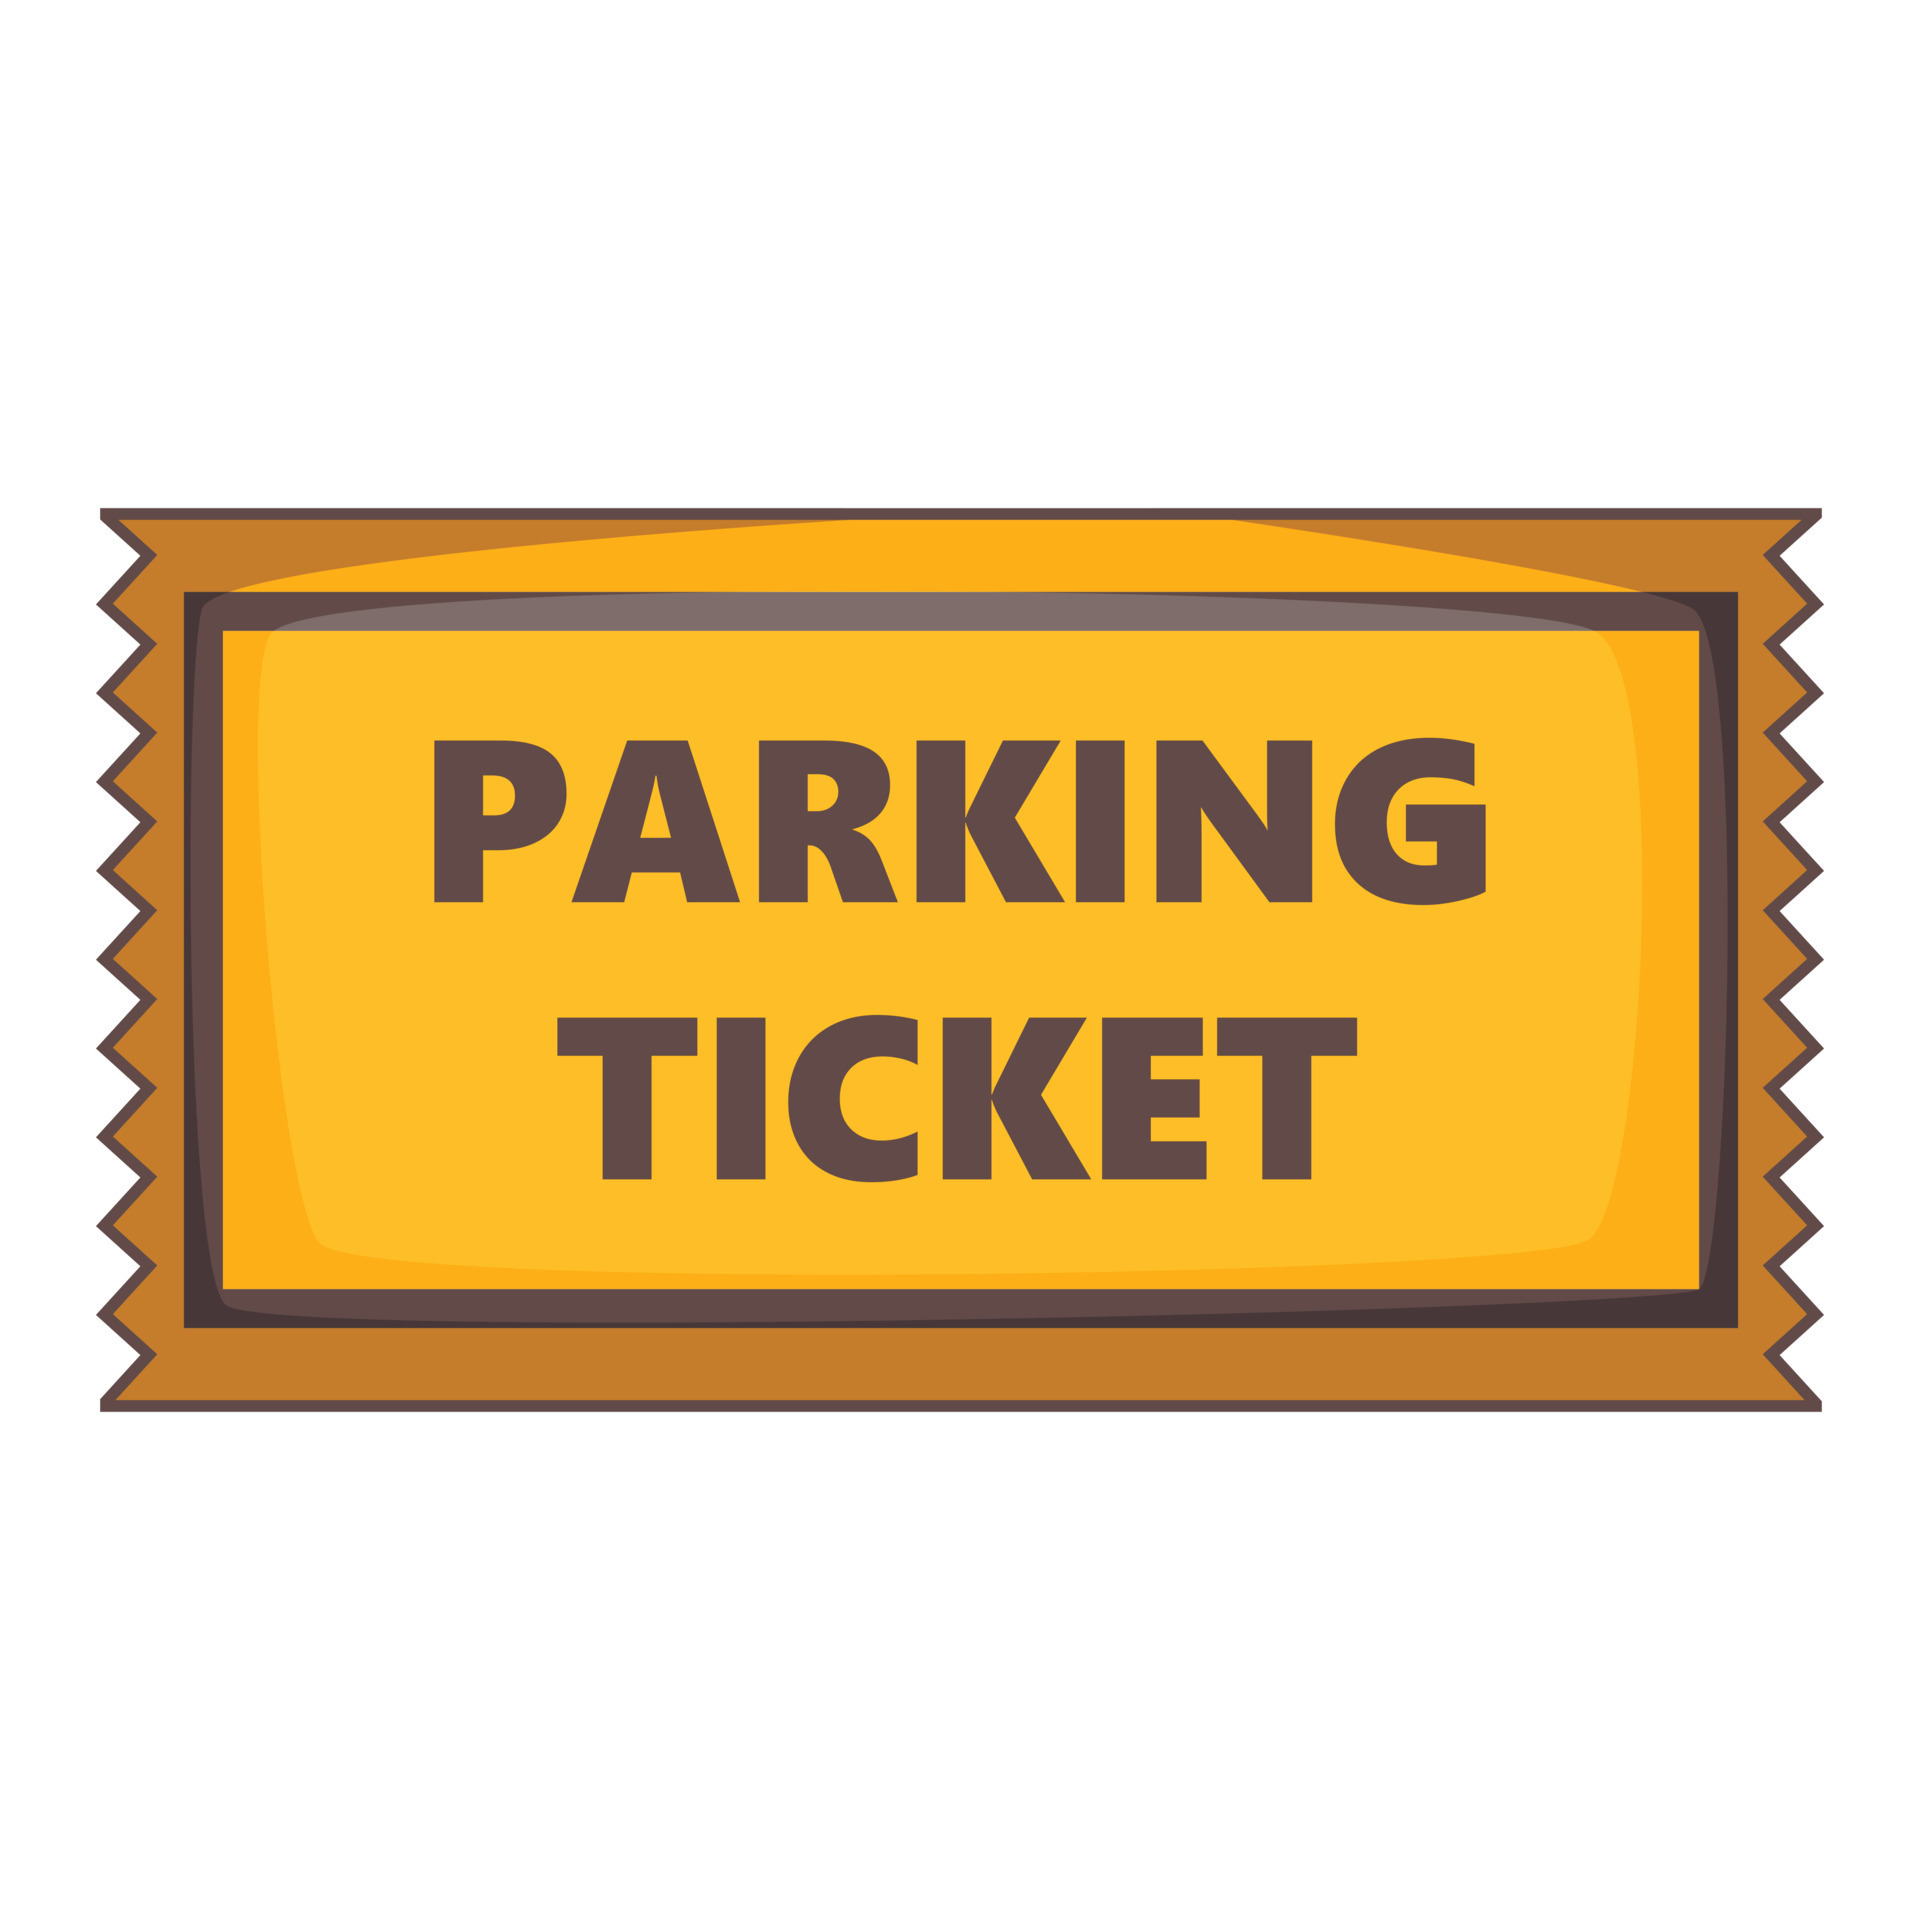 https://static.vecteezy.com/system/resources/previews/014/989/092/original/parking-ticket-icon-cartoon-style-vector.jpg